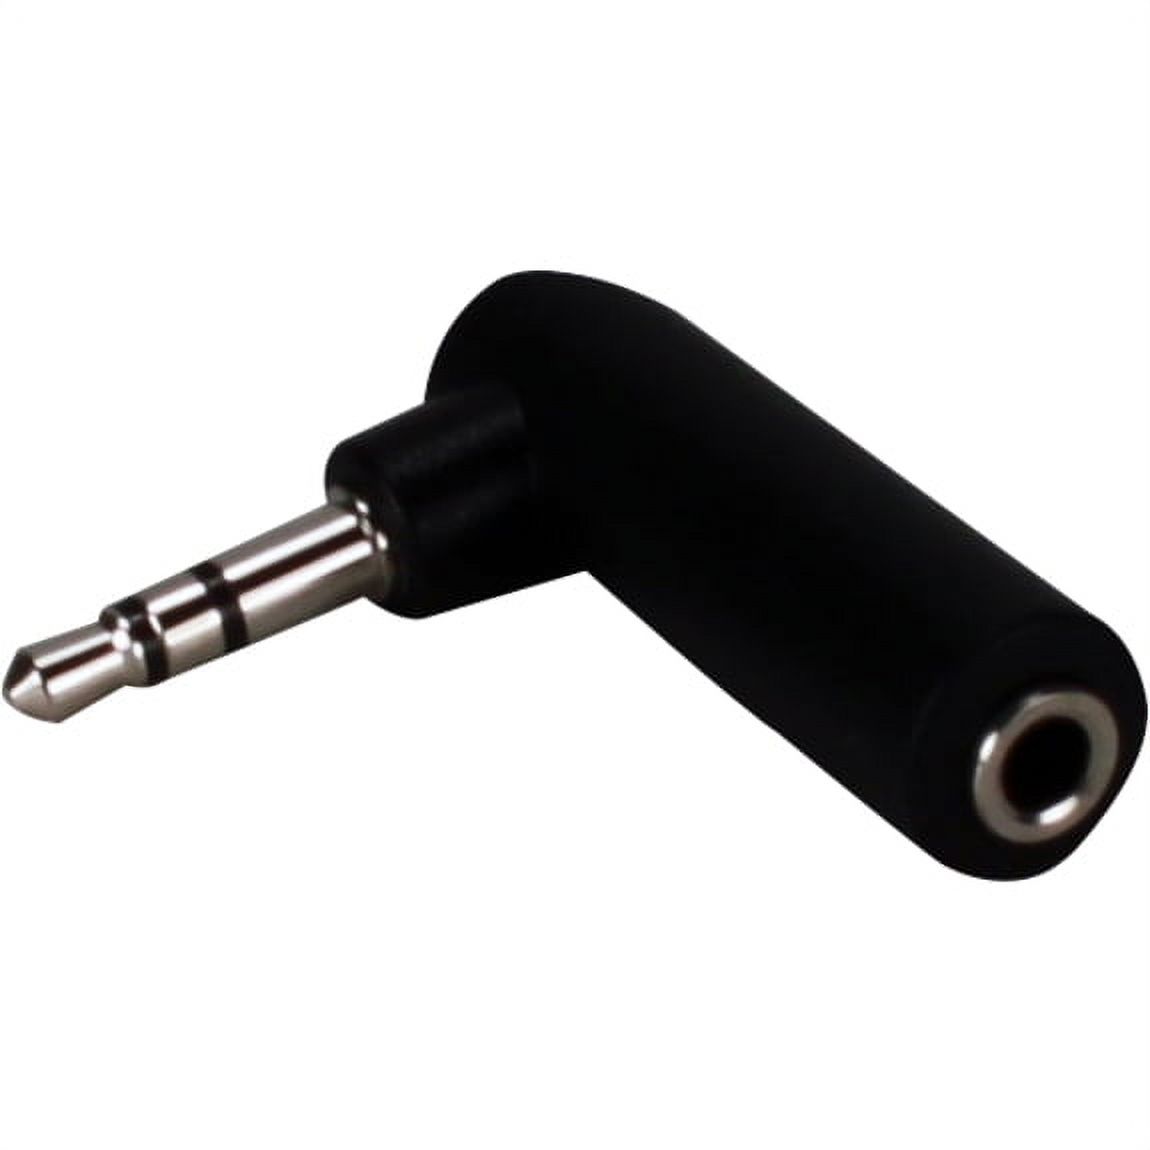 3.5mm Mini-Stereo Male to Female Right Angle Audio Adaptor - image 4 of 4